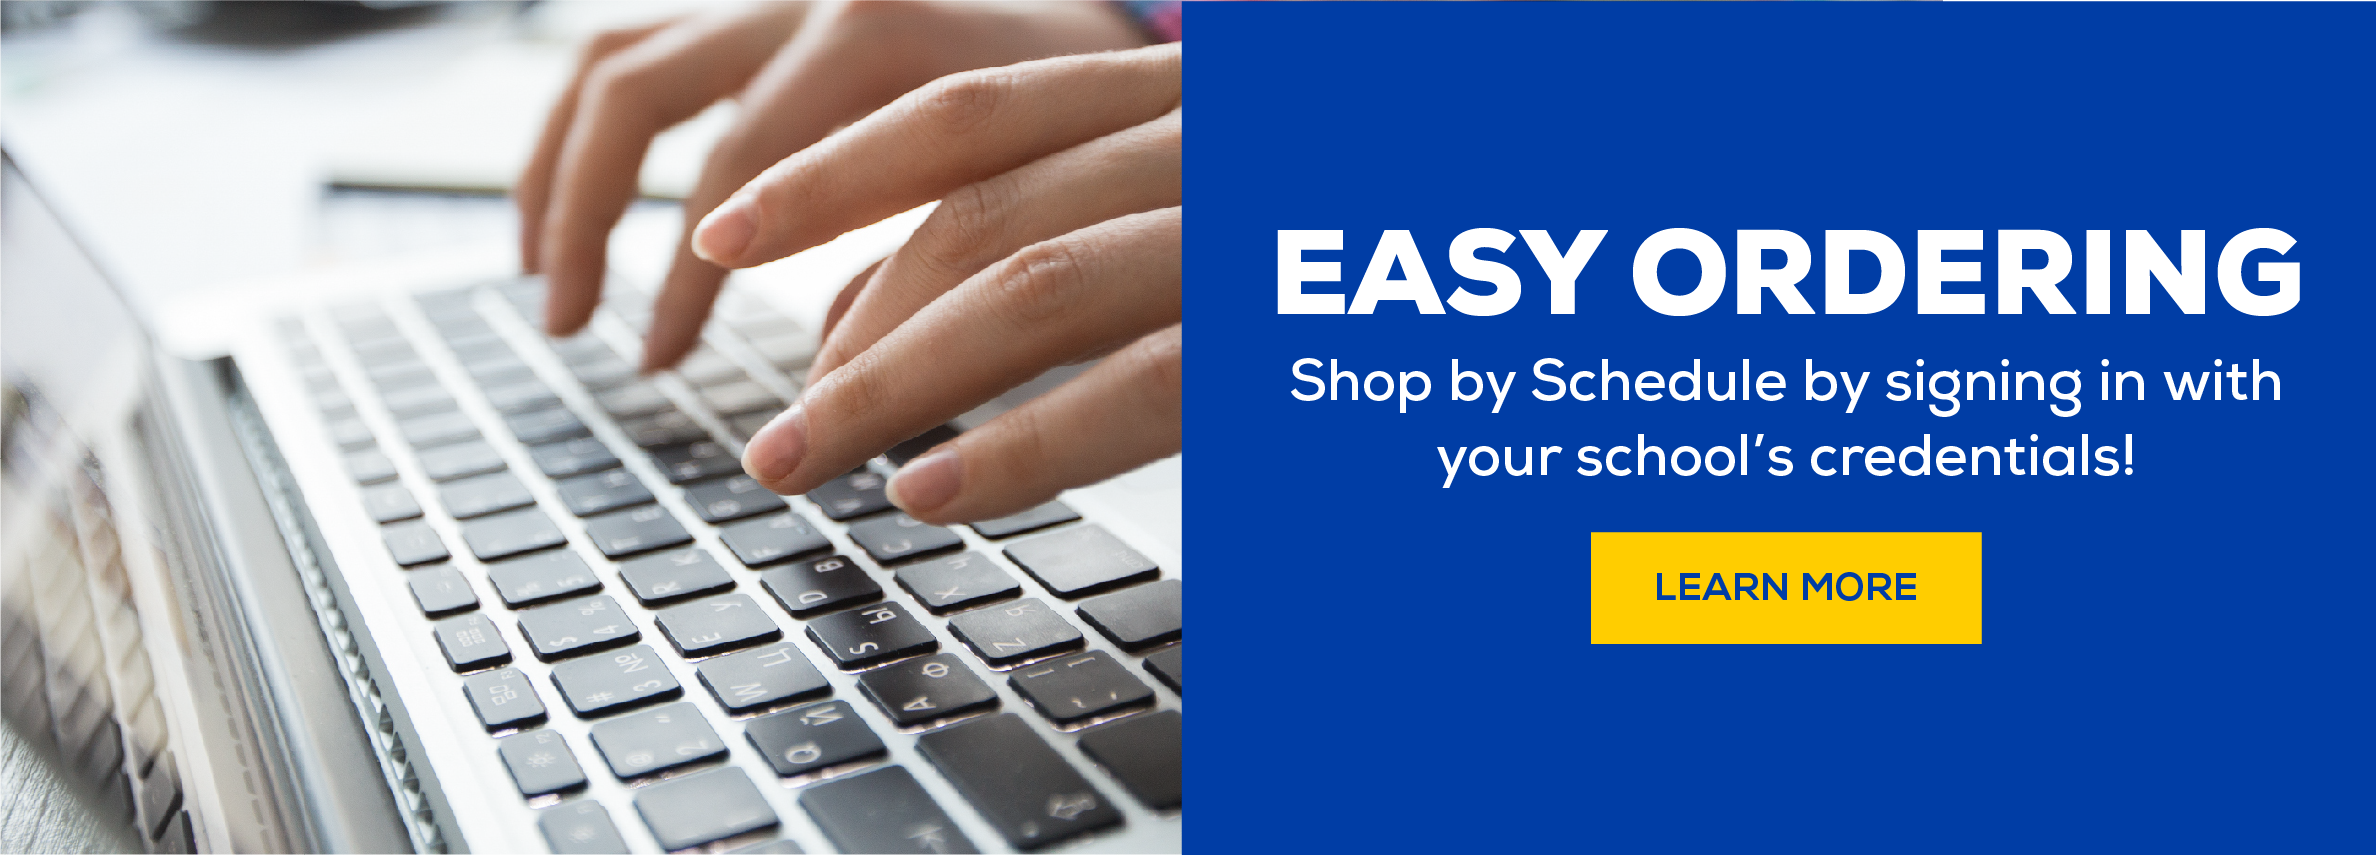 Easy ordering. shop by schedule by signing in with your school's credentials! learn more